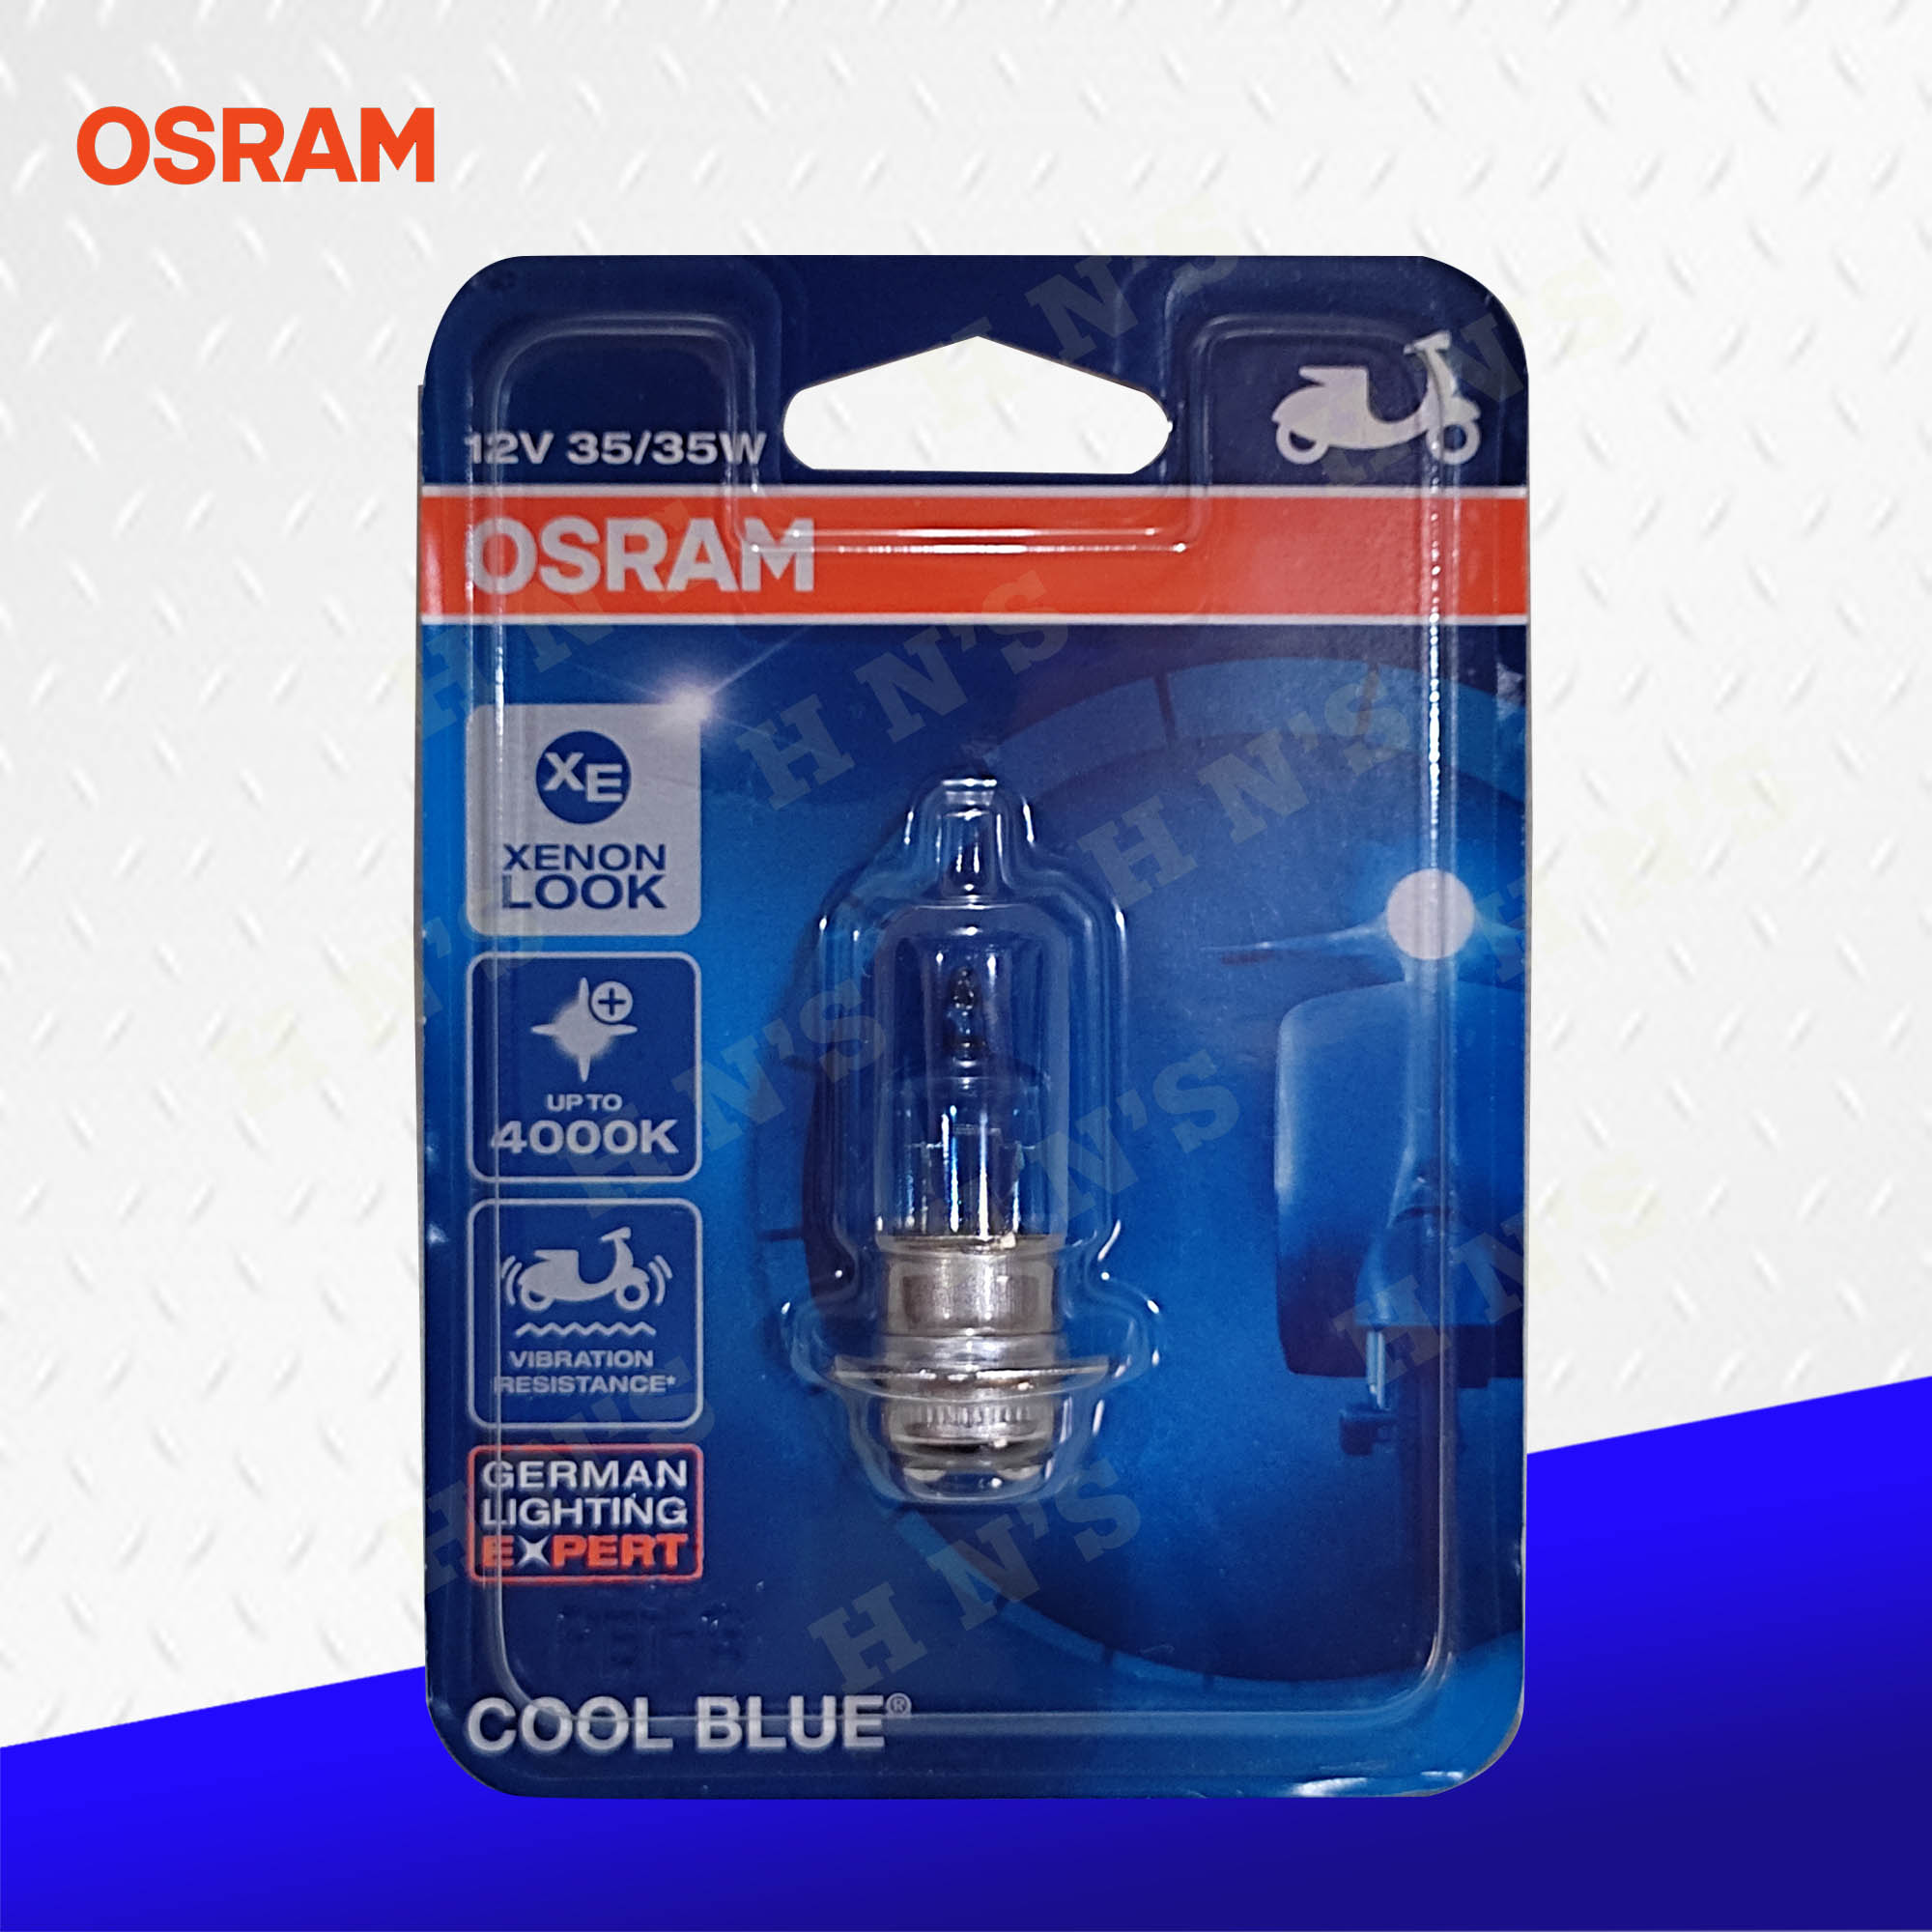 Osram M5 12v 35/35w P15d-25-1 Motorcycle Lamps 4000k Cool White